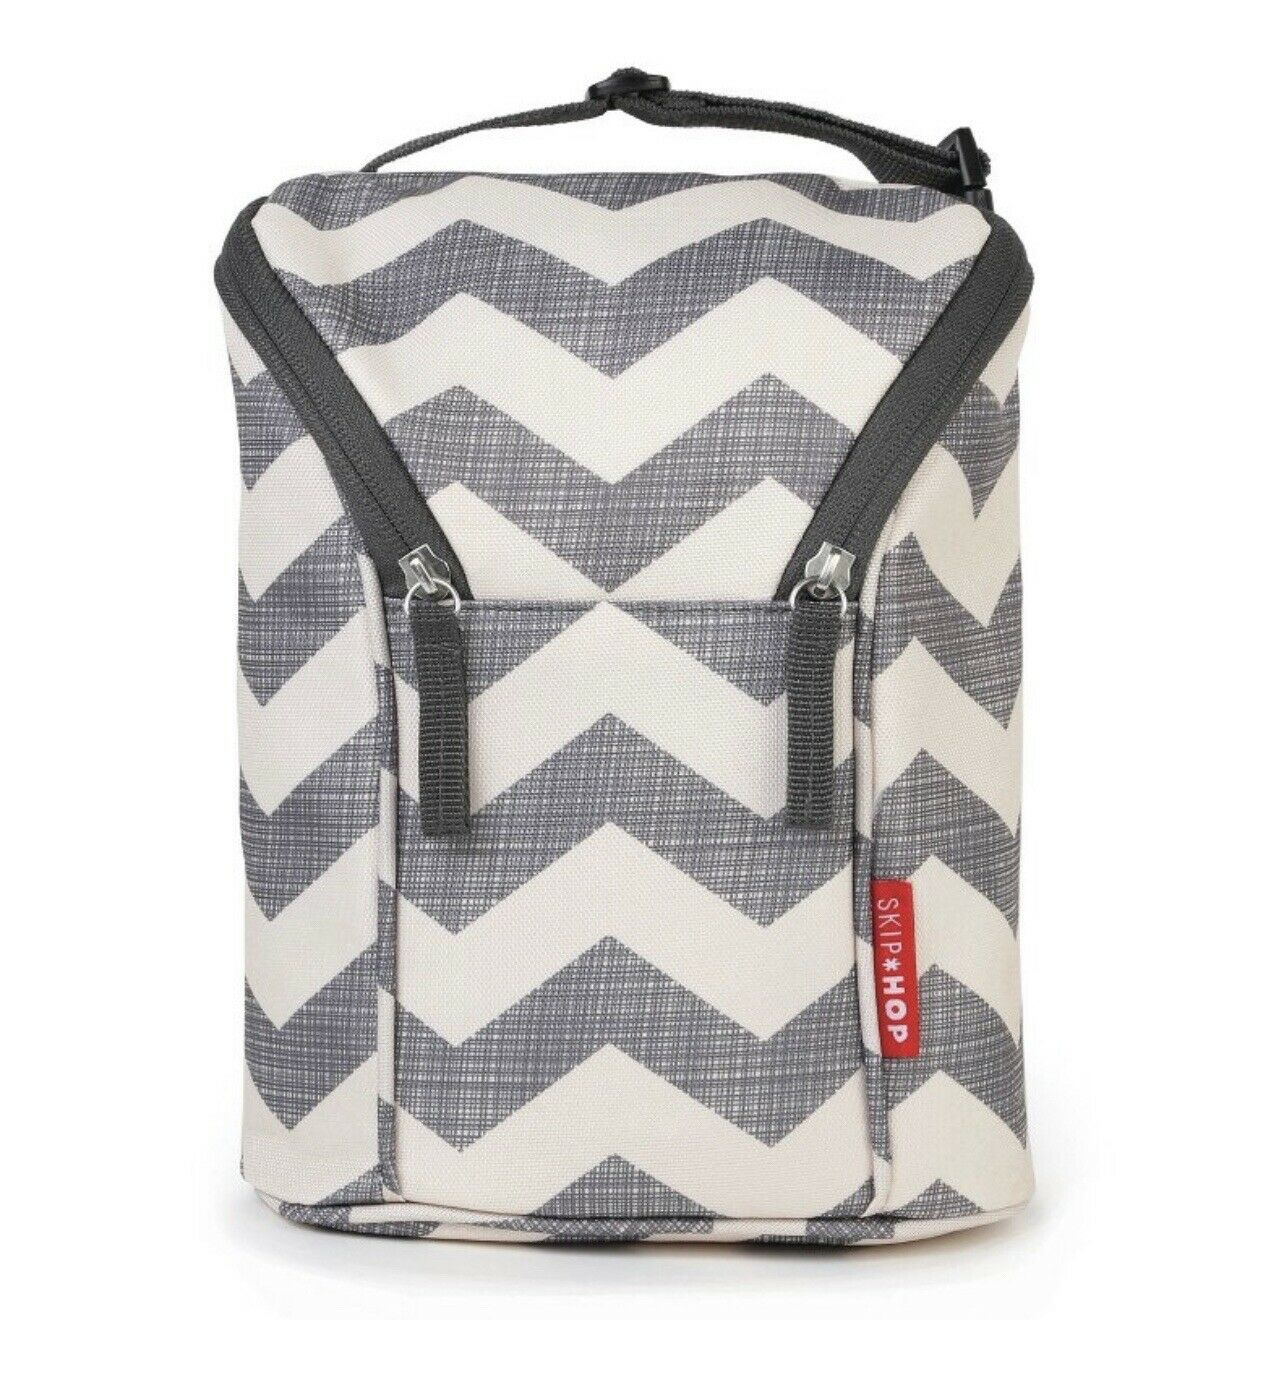 Skip Hop Insulated Bottle Bag/carrier With Gray Handle - Chevron Print